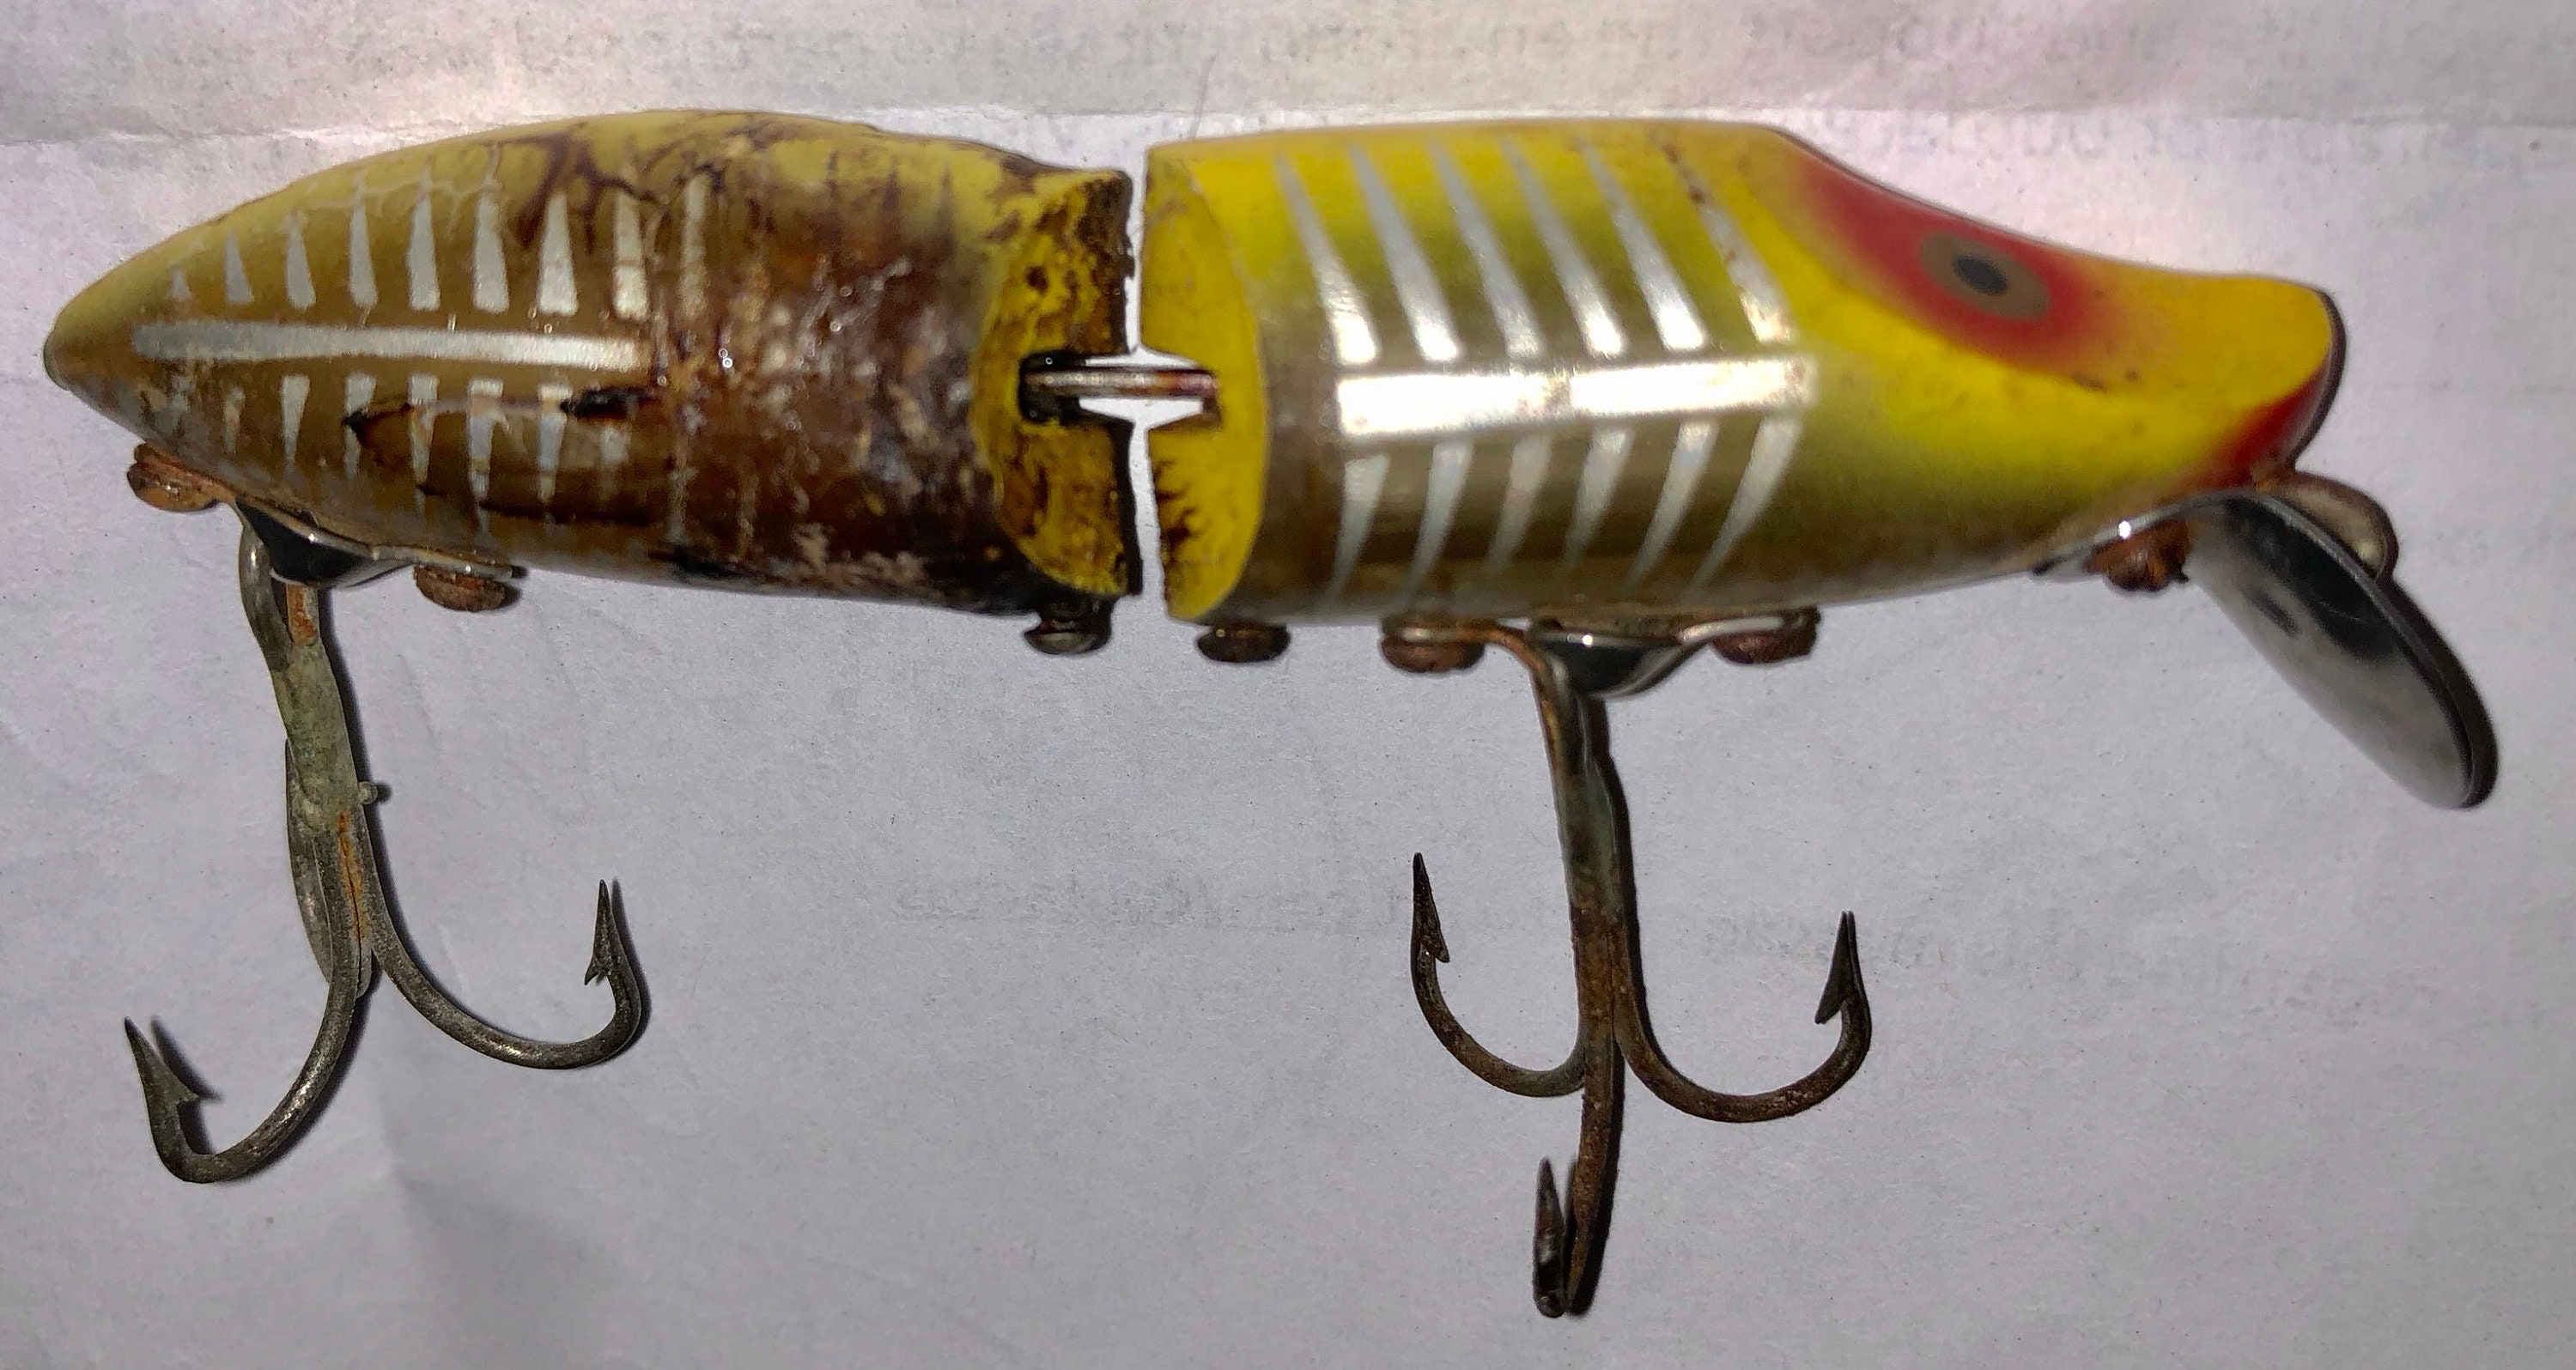 Heddon River Runt Spook Floater Lure Plus Storm Thinfin Lure Vintage  Fishing Lures Two for One Price Vintage Fishing Lures SALE 